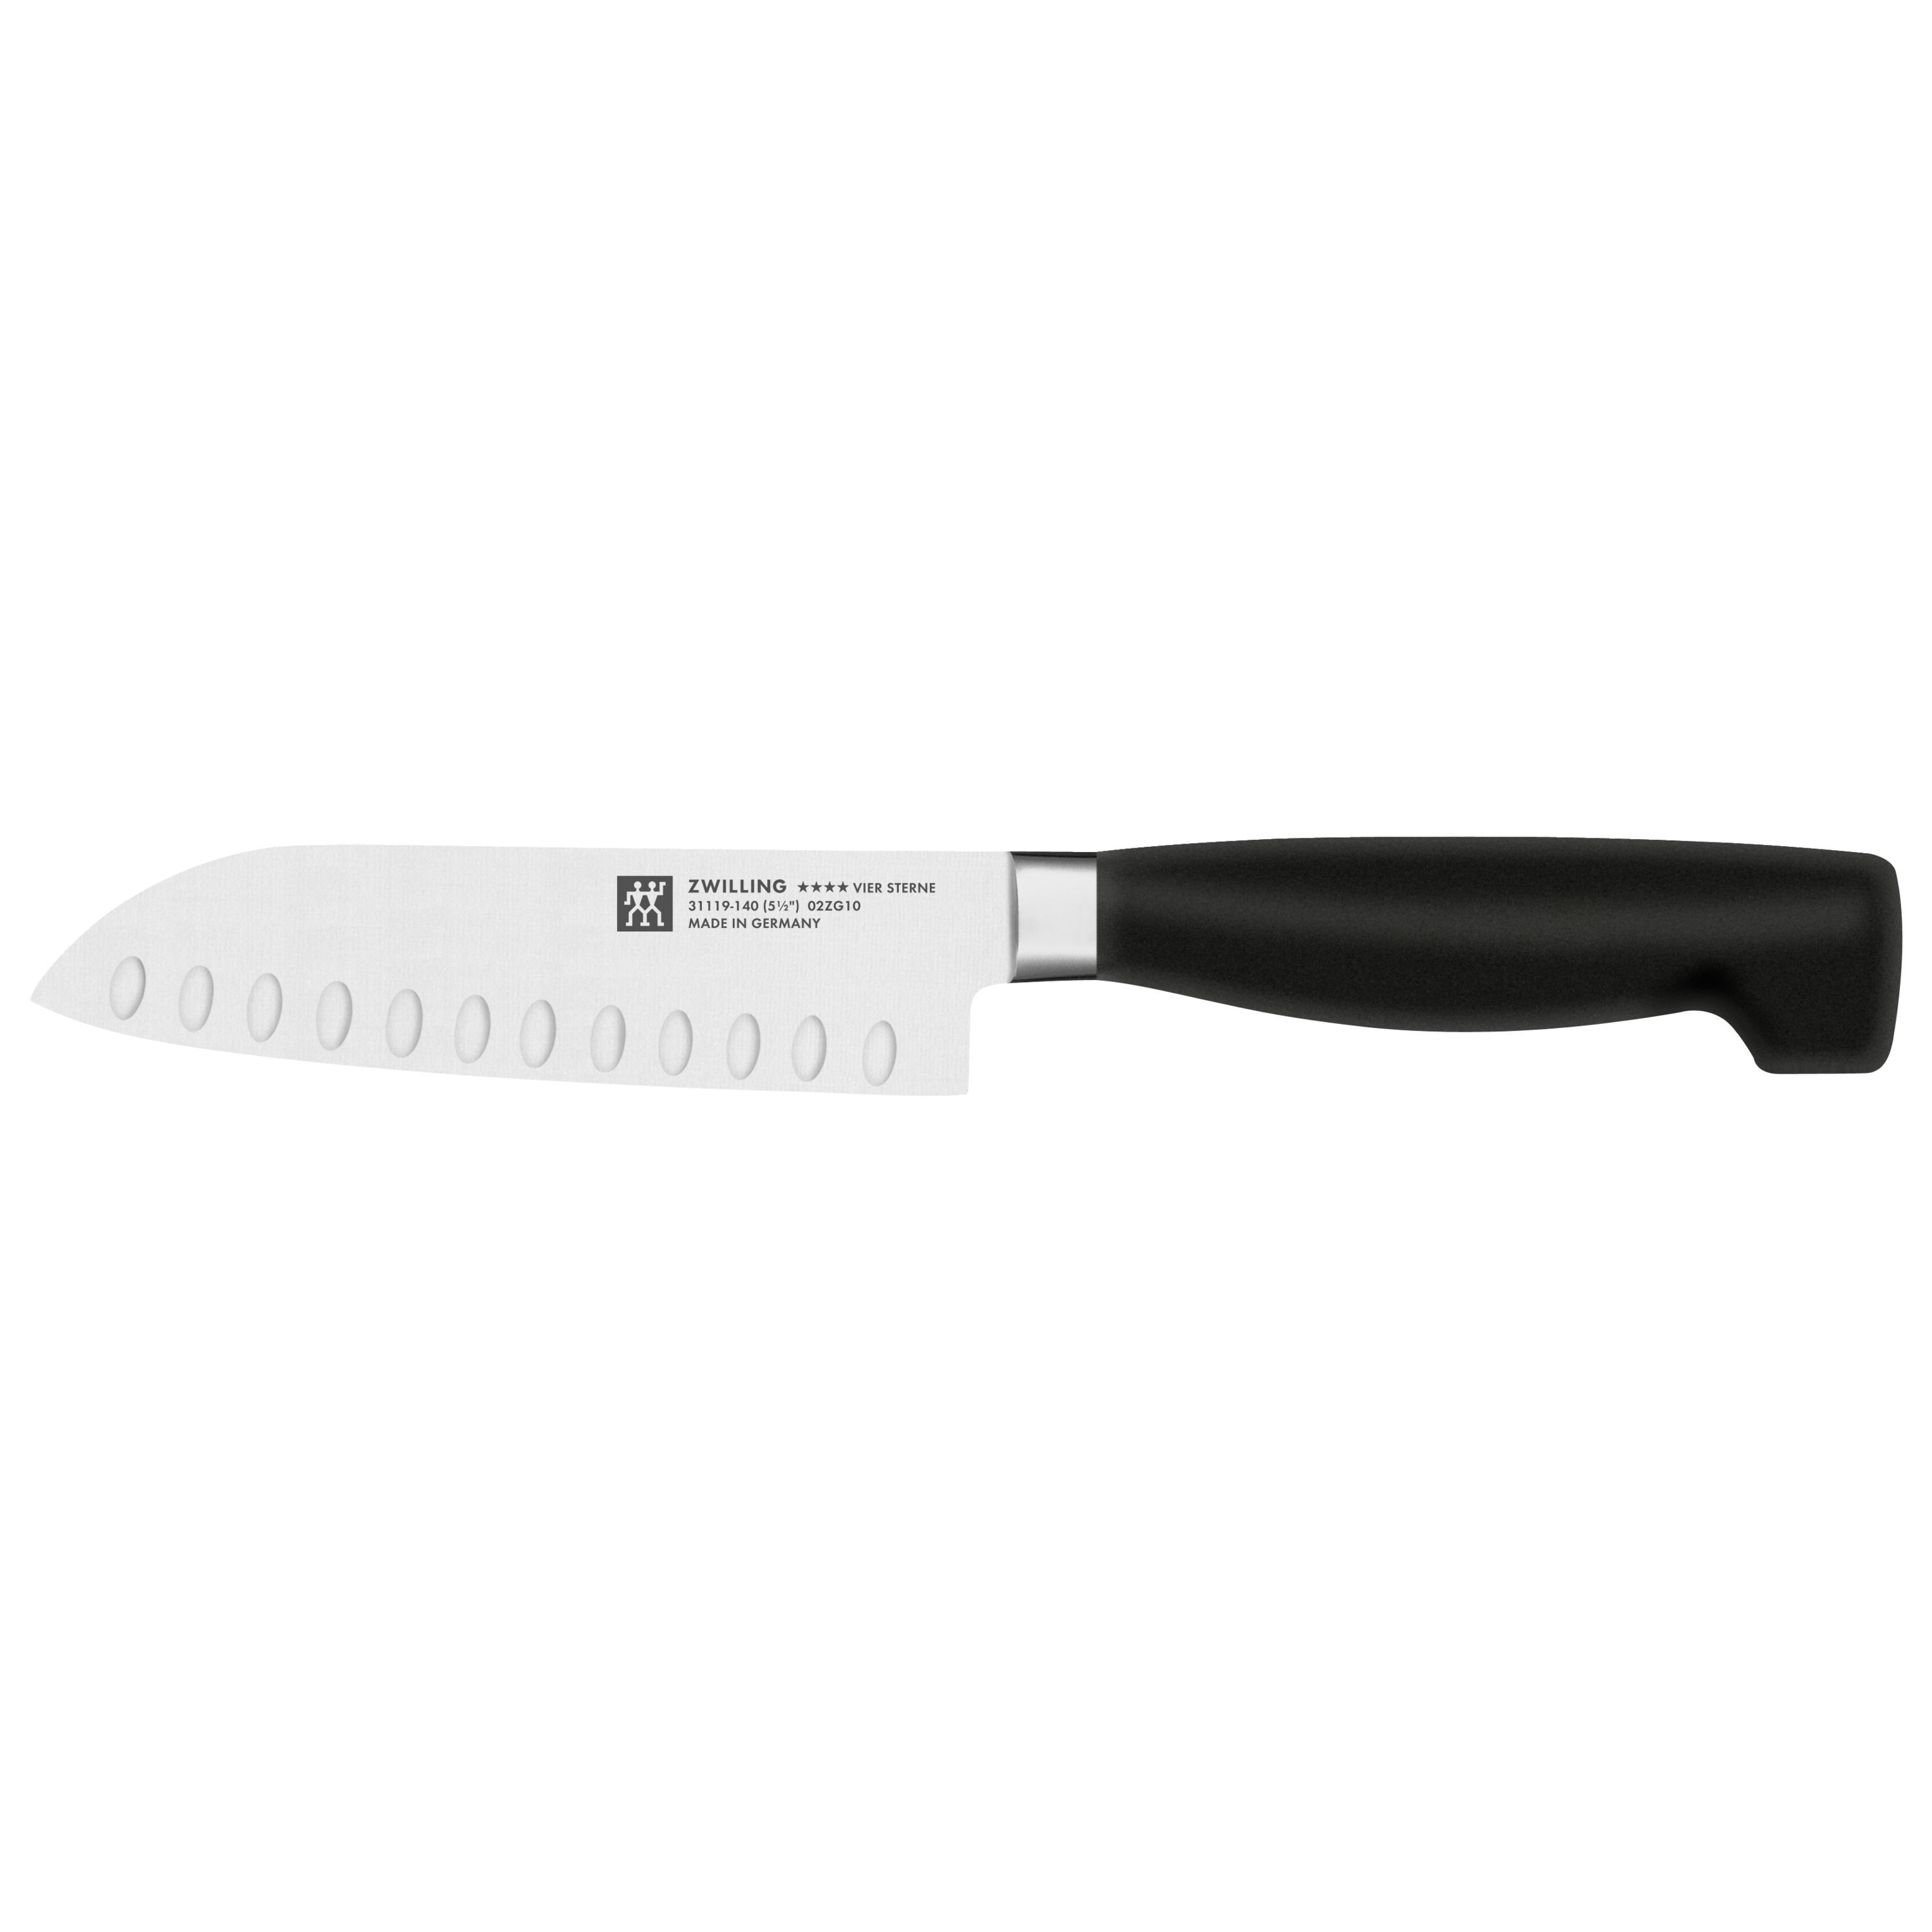 ZWILLING Four Star 5.5-inch, Hollow Edge Santoku Knife ZWILLING